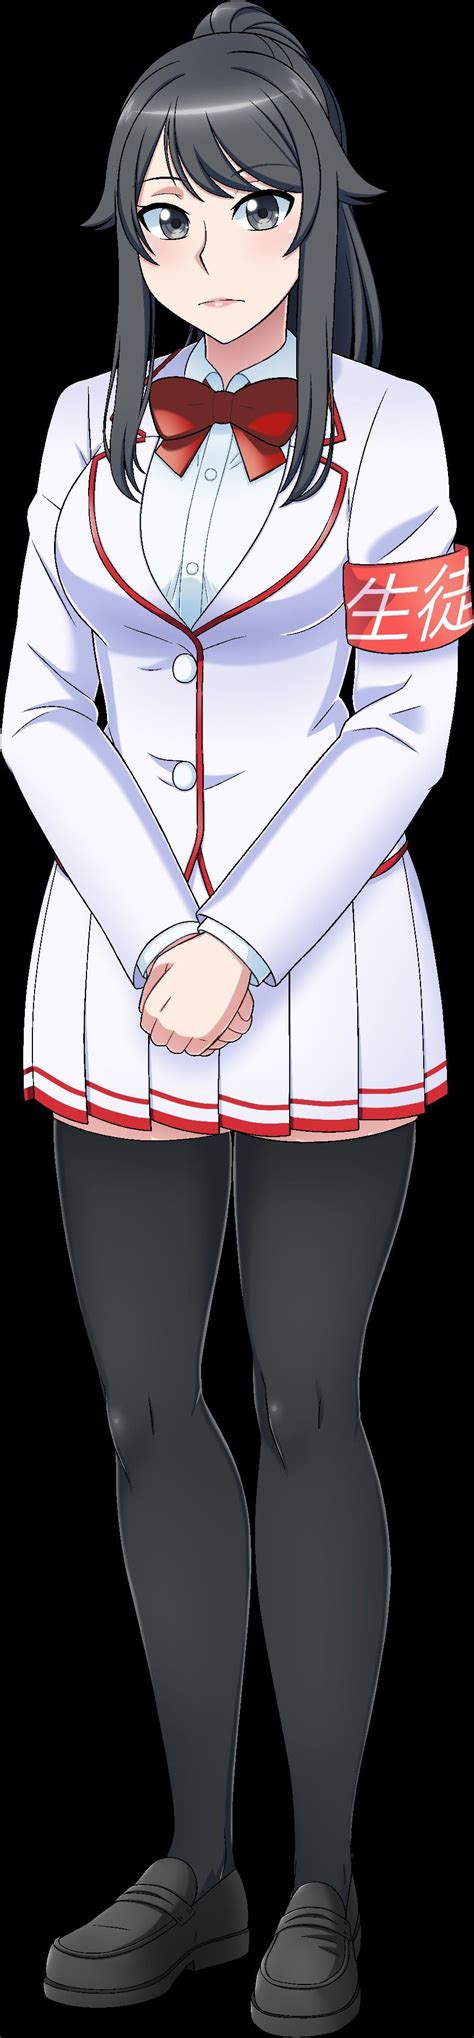 Student Council Ayano Yandere Simulator Characters Student Council